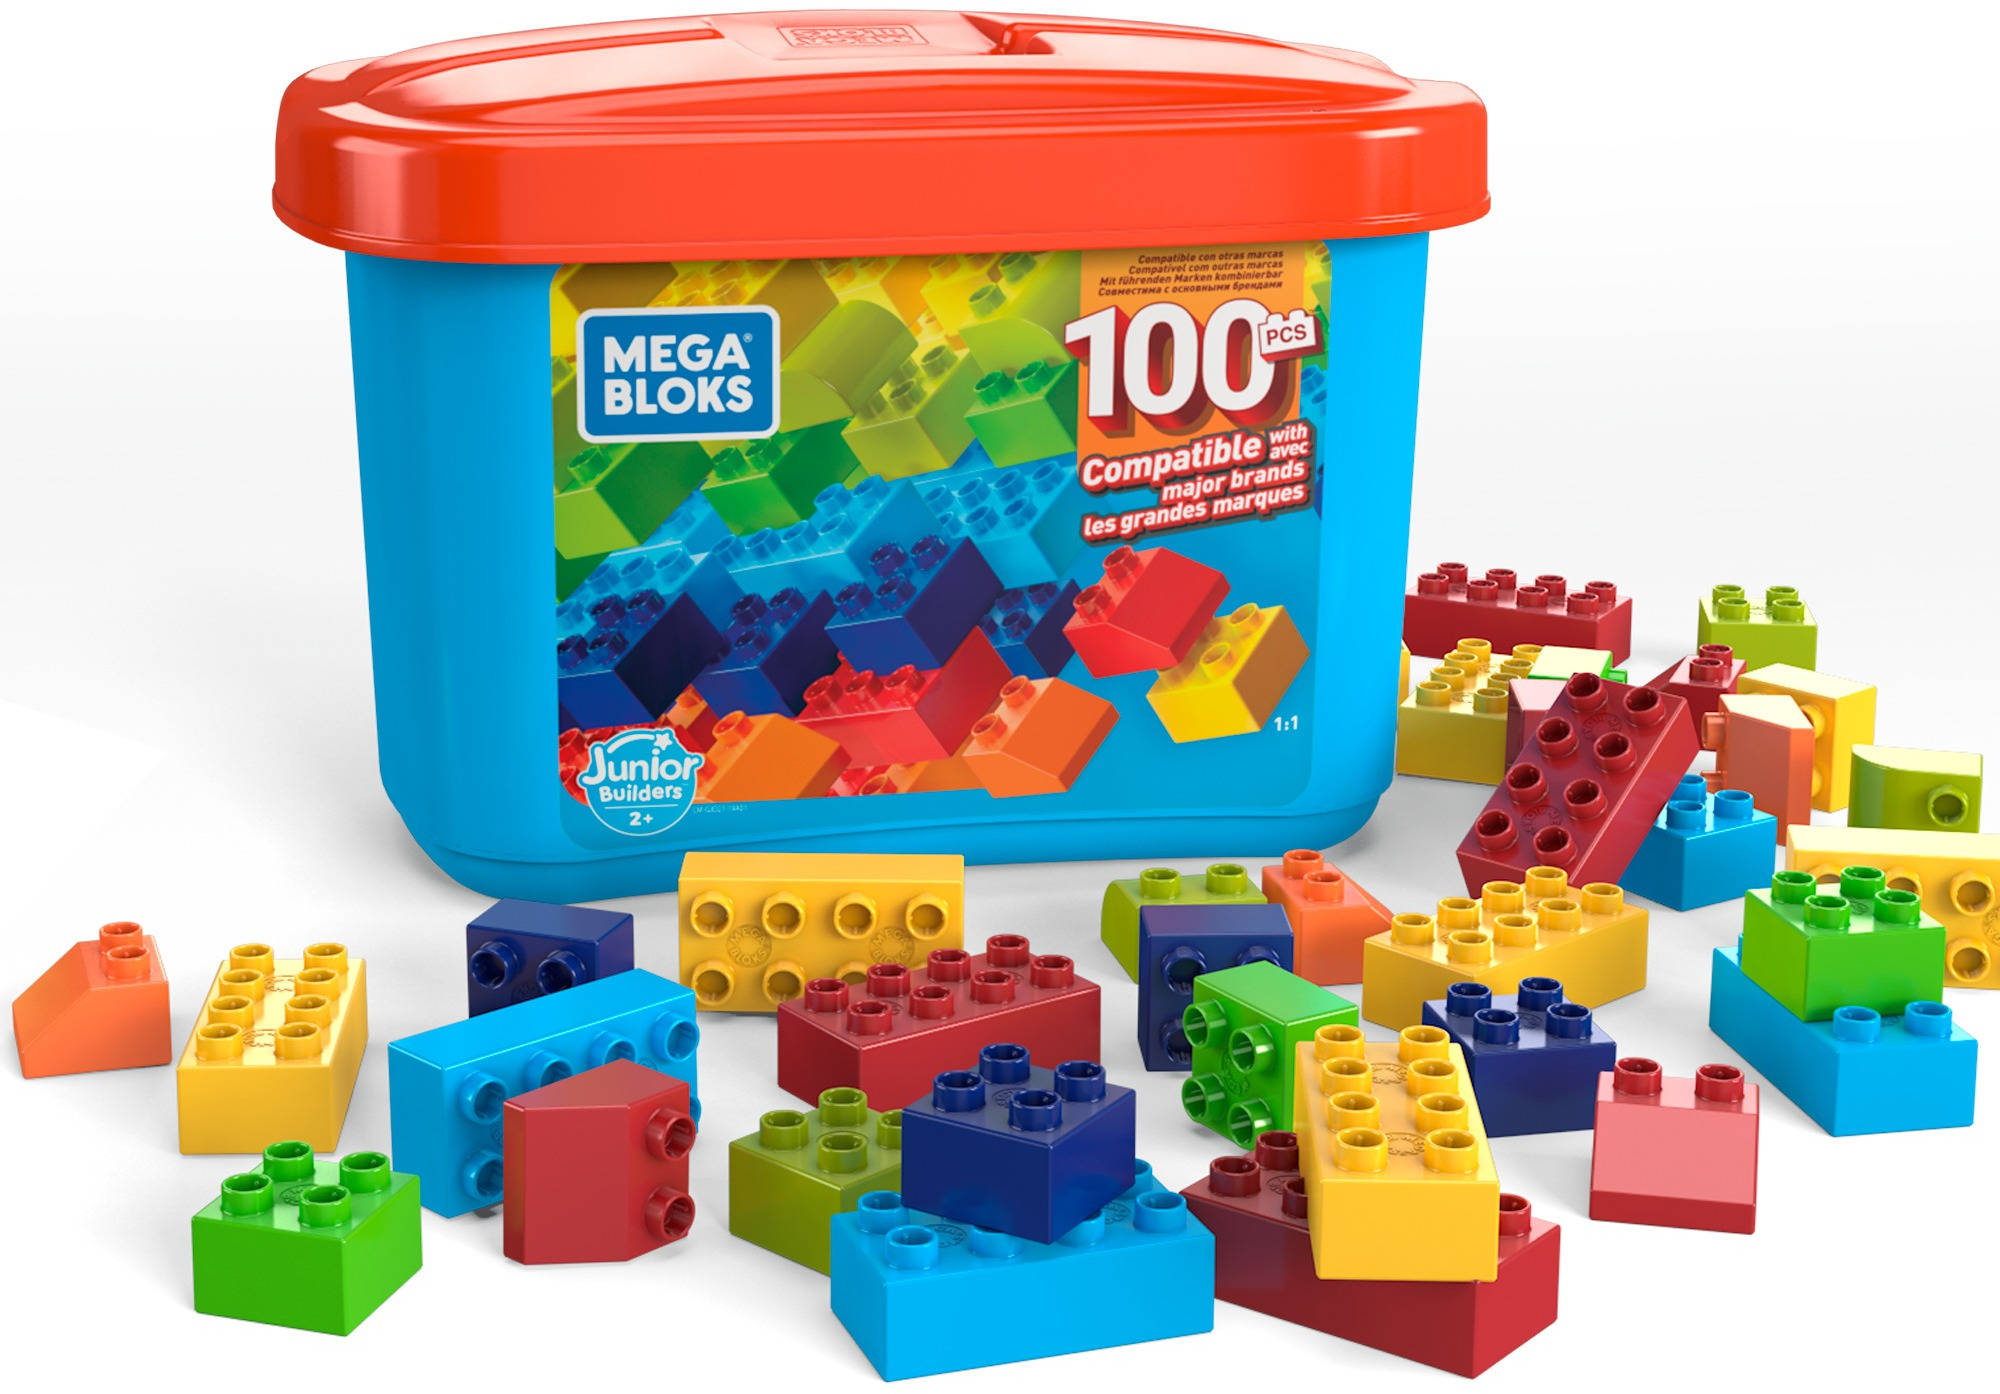 Mega Bloks Junior Builders 100-pc Building Tub with Building Blocks, Building Toys for Toddlers (100 Pieces) - image 1 of 7